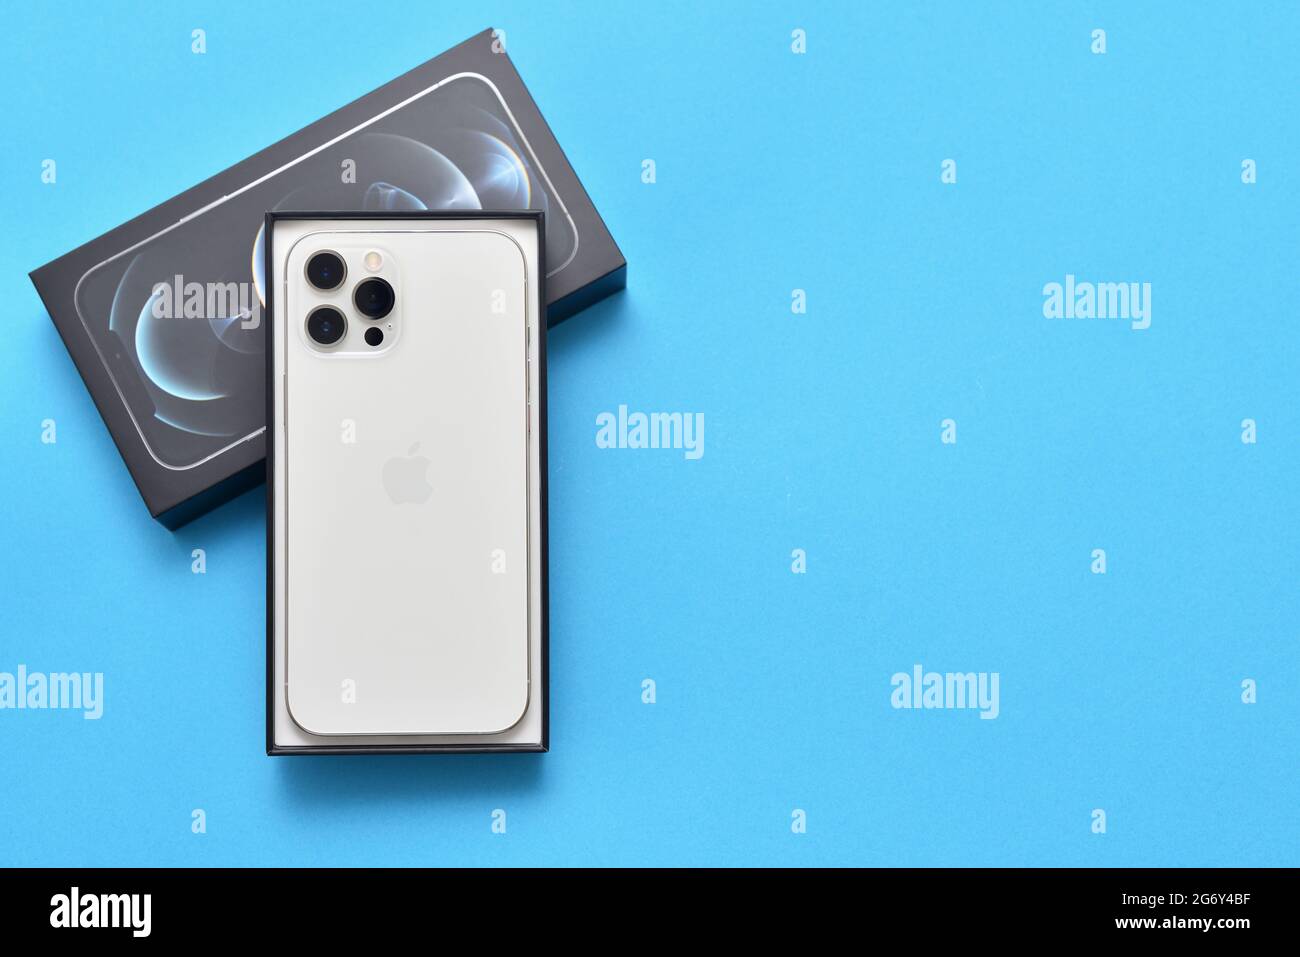 STARIY OSKOL, RUSSIA - JULY 5, 2021: New white iPhone 12 pro max in a box on a blue background with copy space Stock Photo